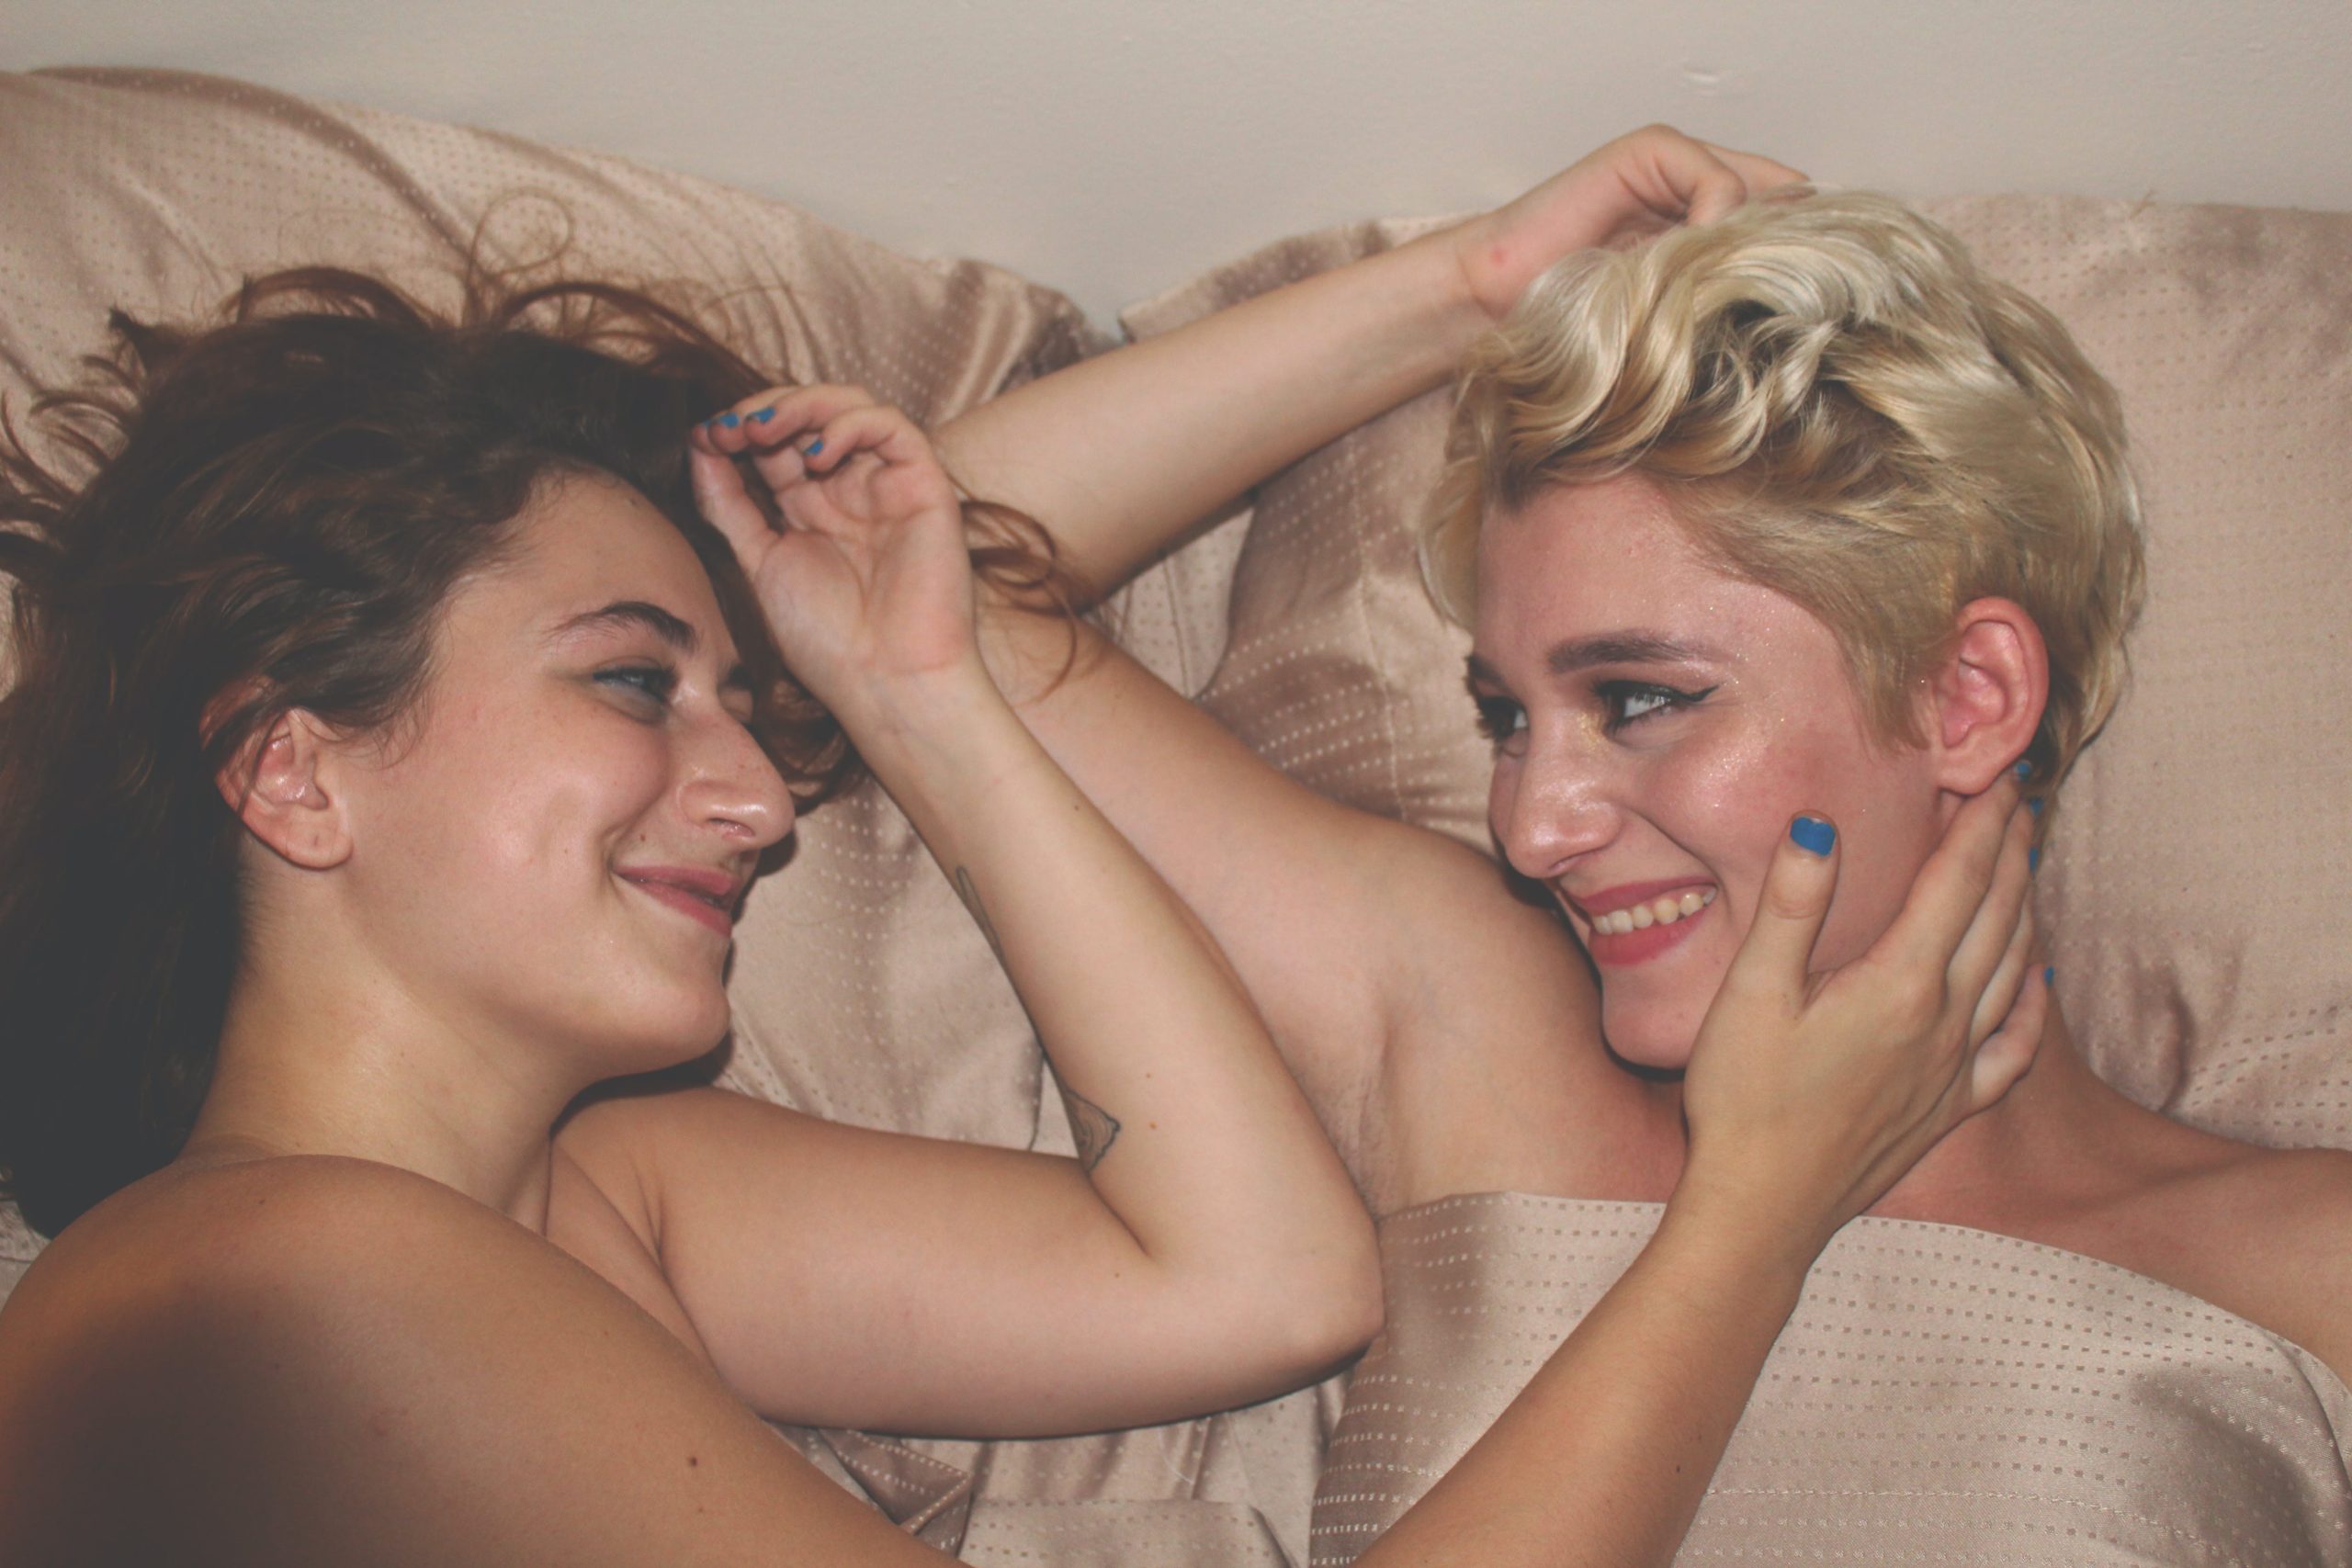 2 LGBTQ people lying on the bed looking at each other and laughing